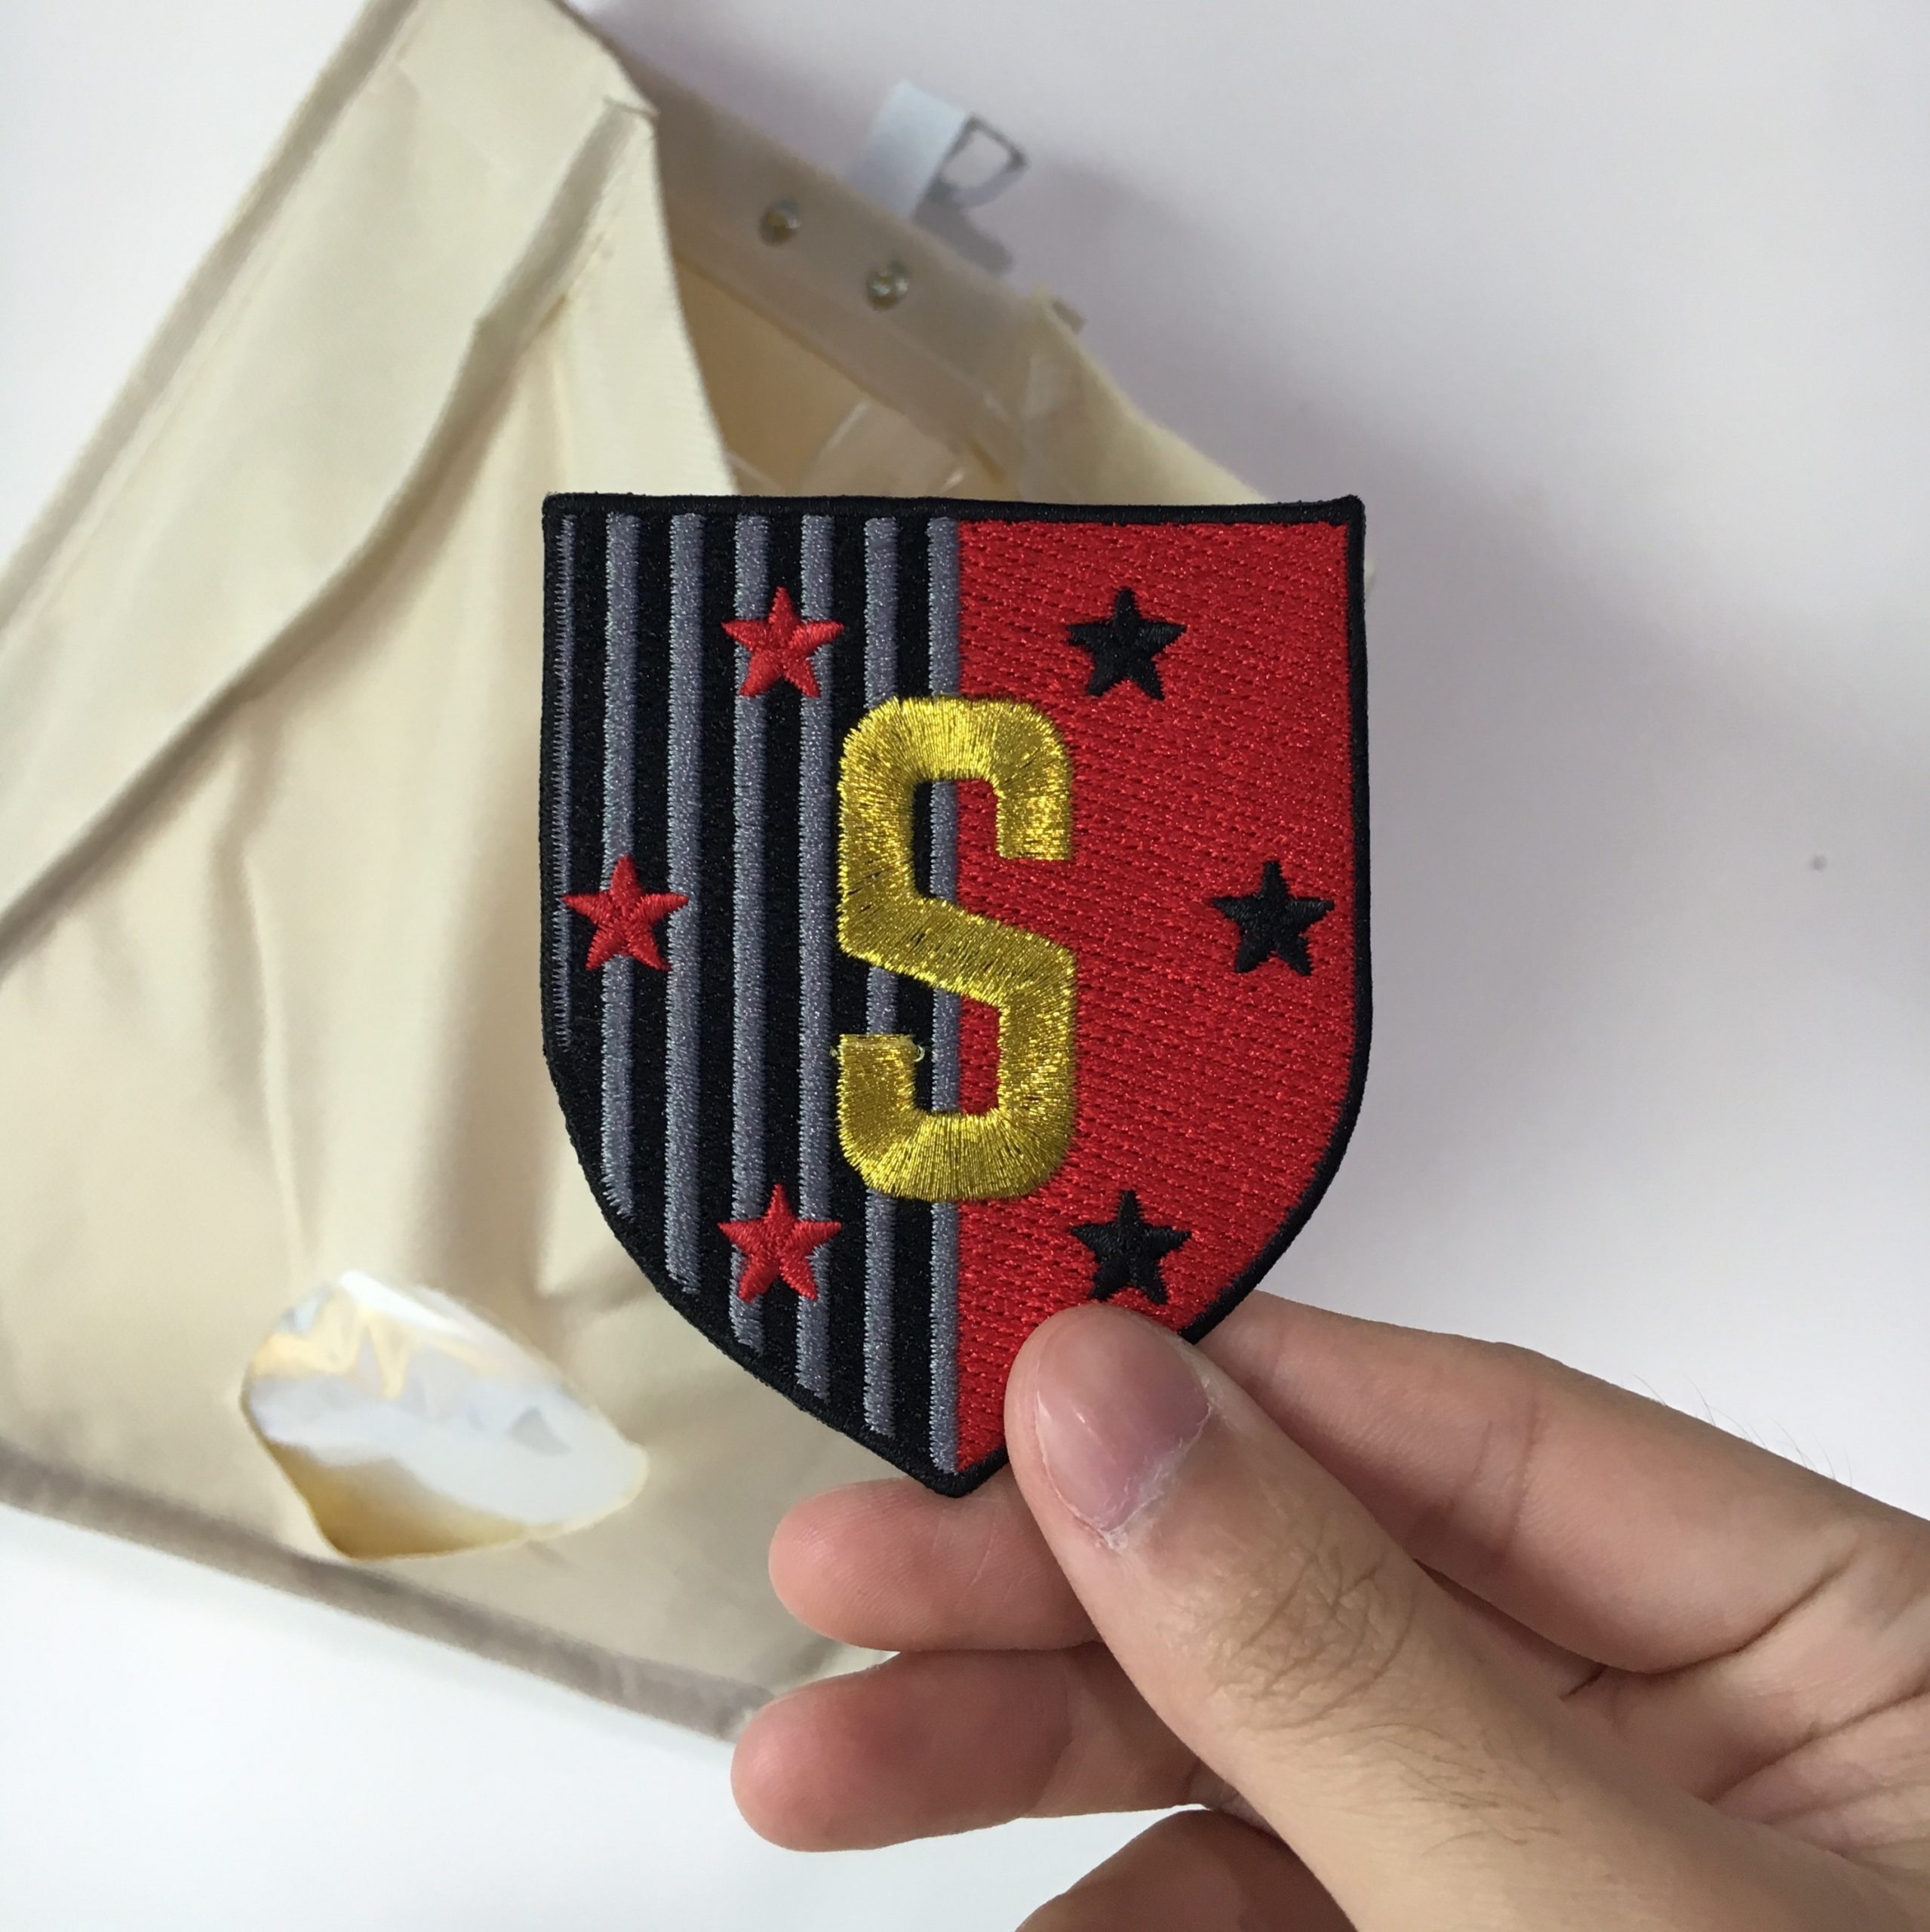 custom velcro patches for clothing iron on patch Hook and Loop Clothes  Stickers DIY your own Badges